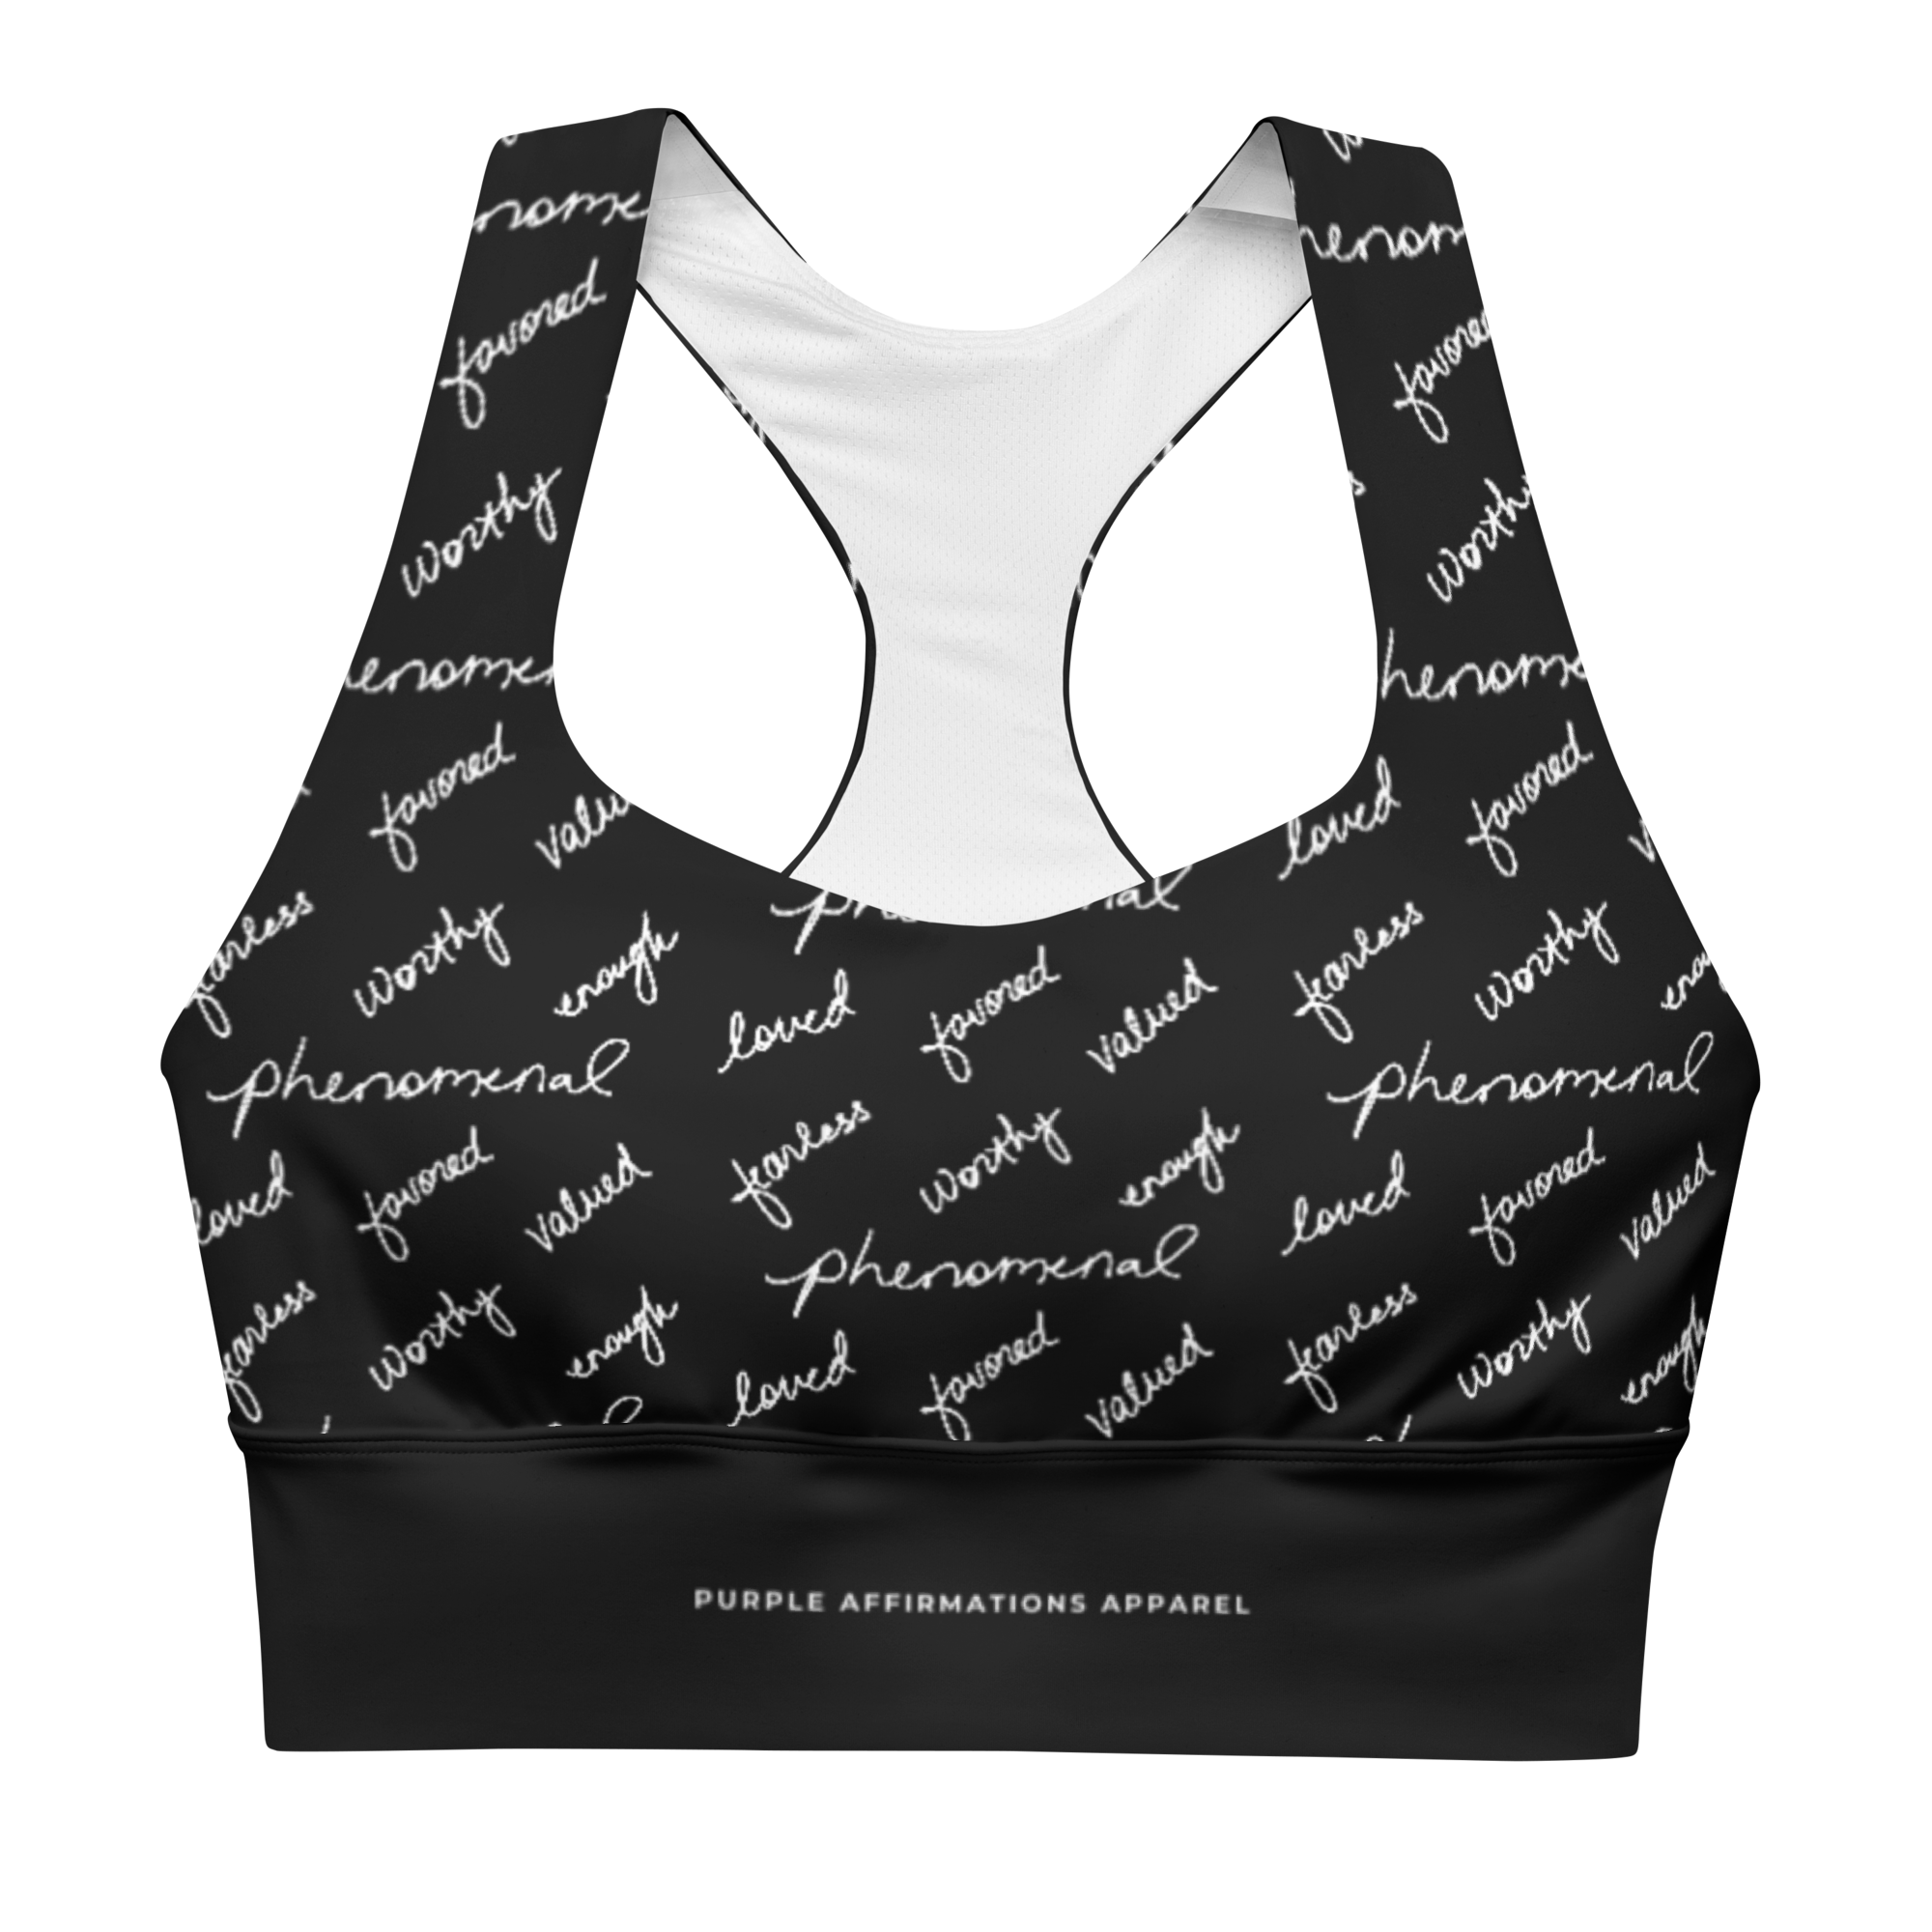 https://cdn.shopify.com/s/files/1/0526/9055/0949/products/all-over-print-longline-sports-bra-white-front-63628e775ba8d_2000x.png?v=1667403394